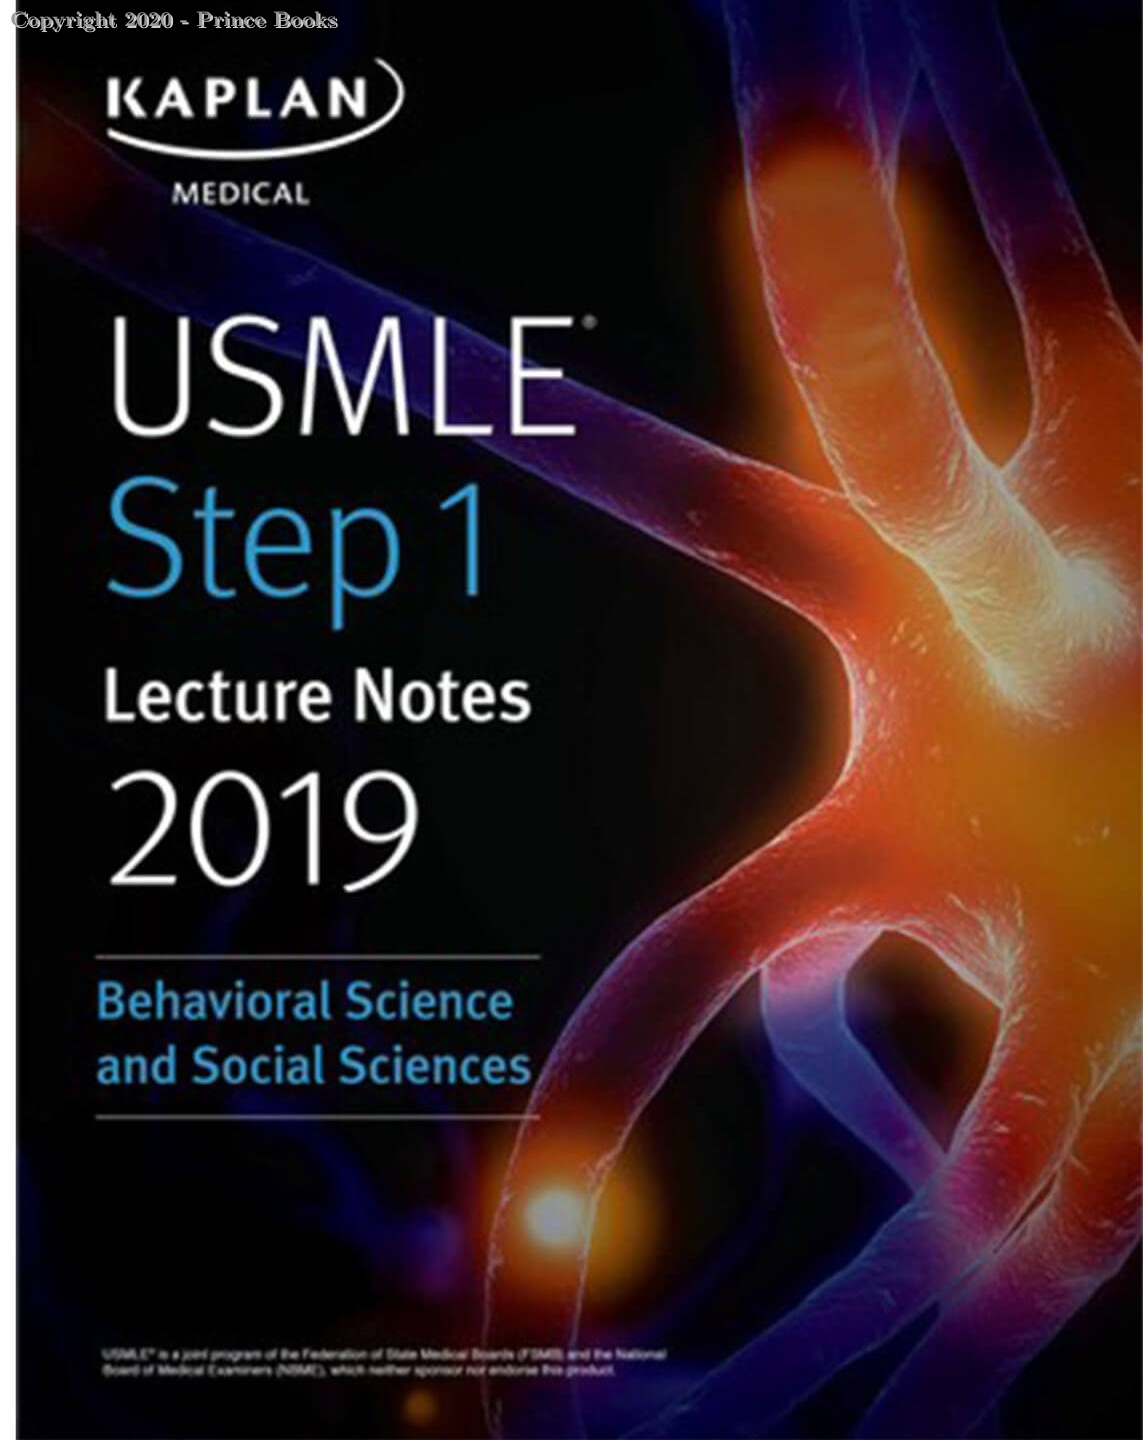 KAPLAN USMLE STEP 1 LECTURE NOTES BEHAVIORAL SCIENCE AND SOCIAL SCIENCES